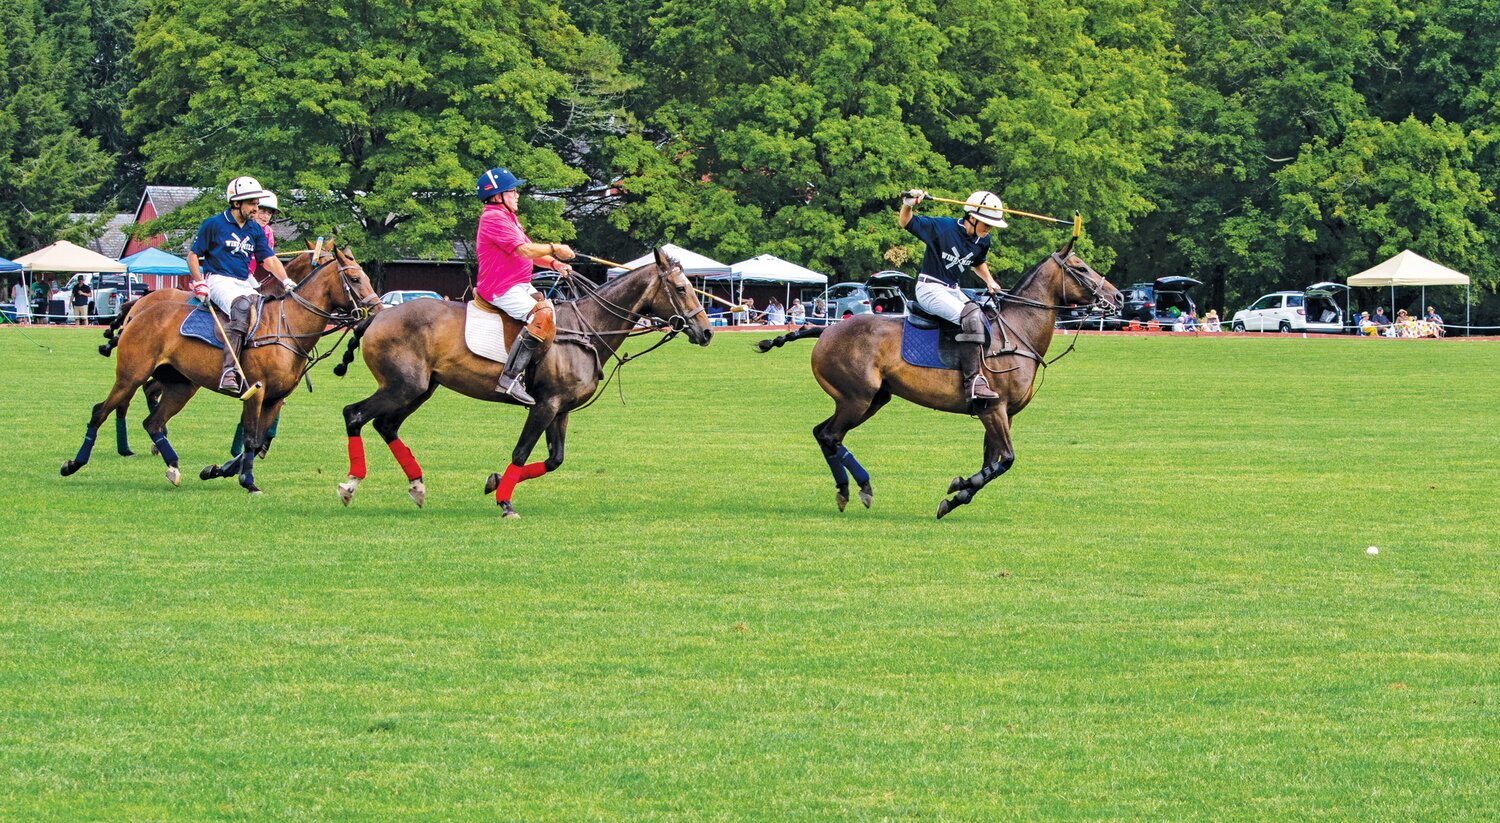 Wind Mill and New Hope polo players chase take part in a tilt at the Tinicum Park Polo Club.